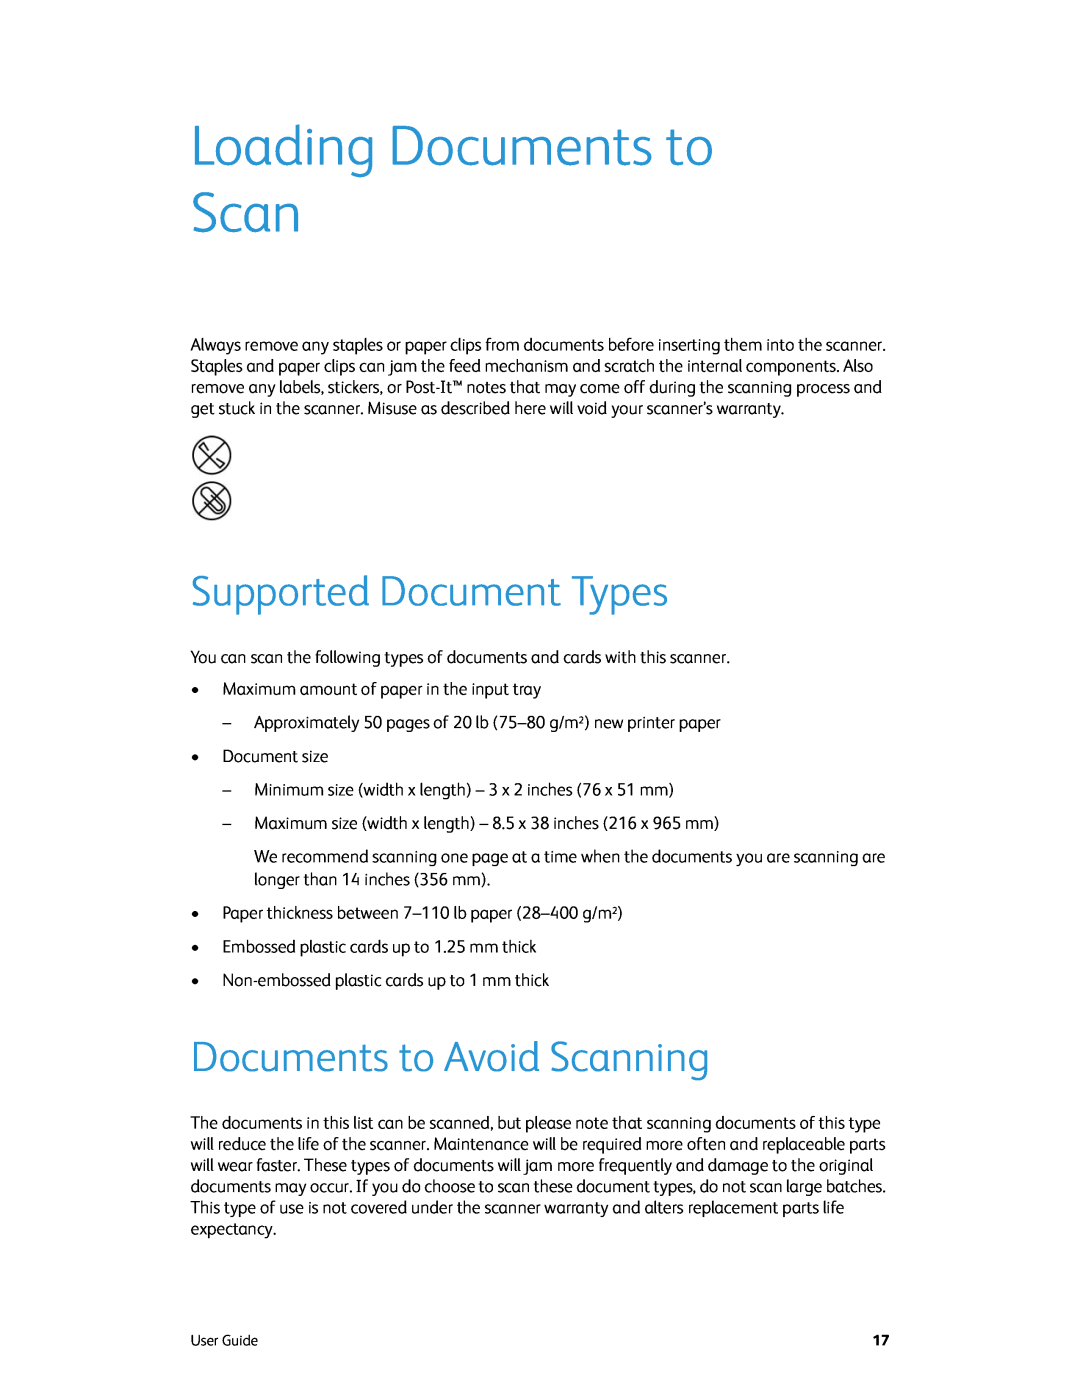 Xerox xerox manual Loading Documents to Scan, Supported Document Types, Documents to Avoid Scanning 